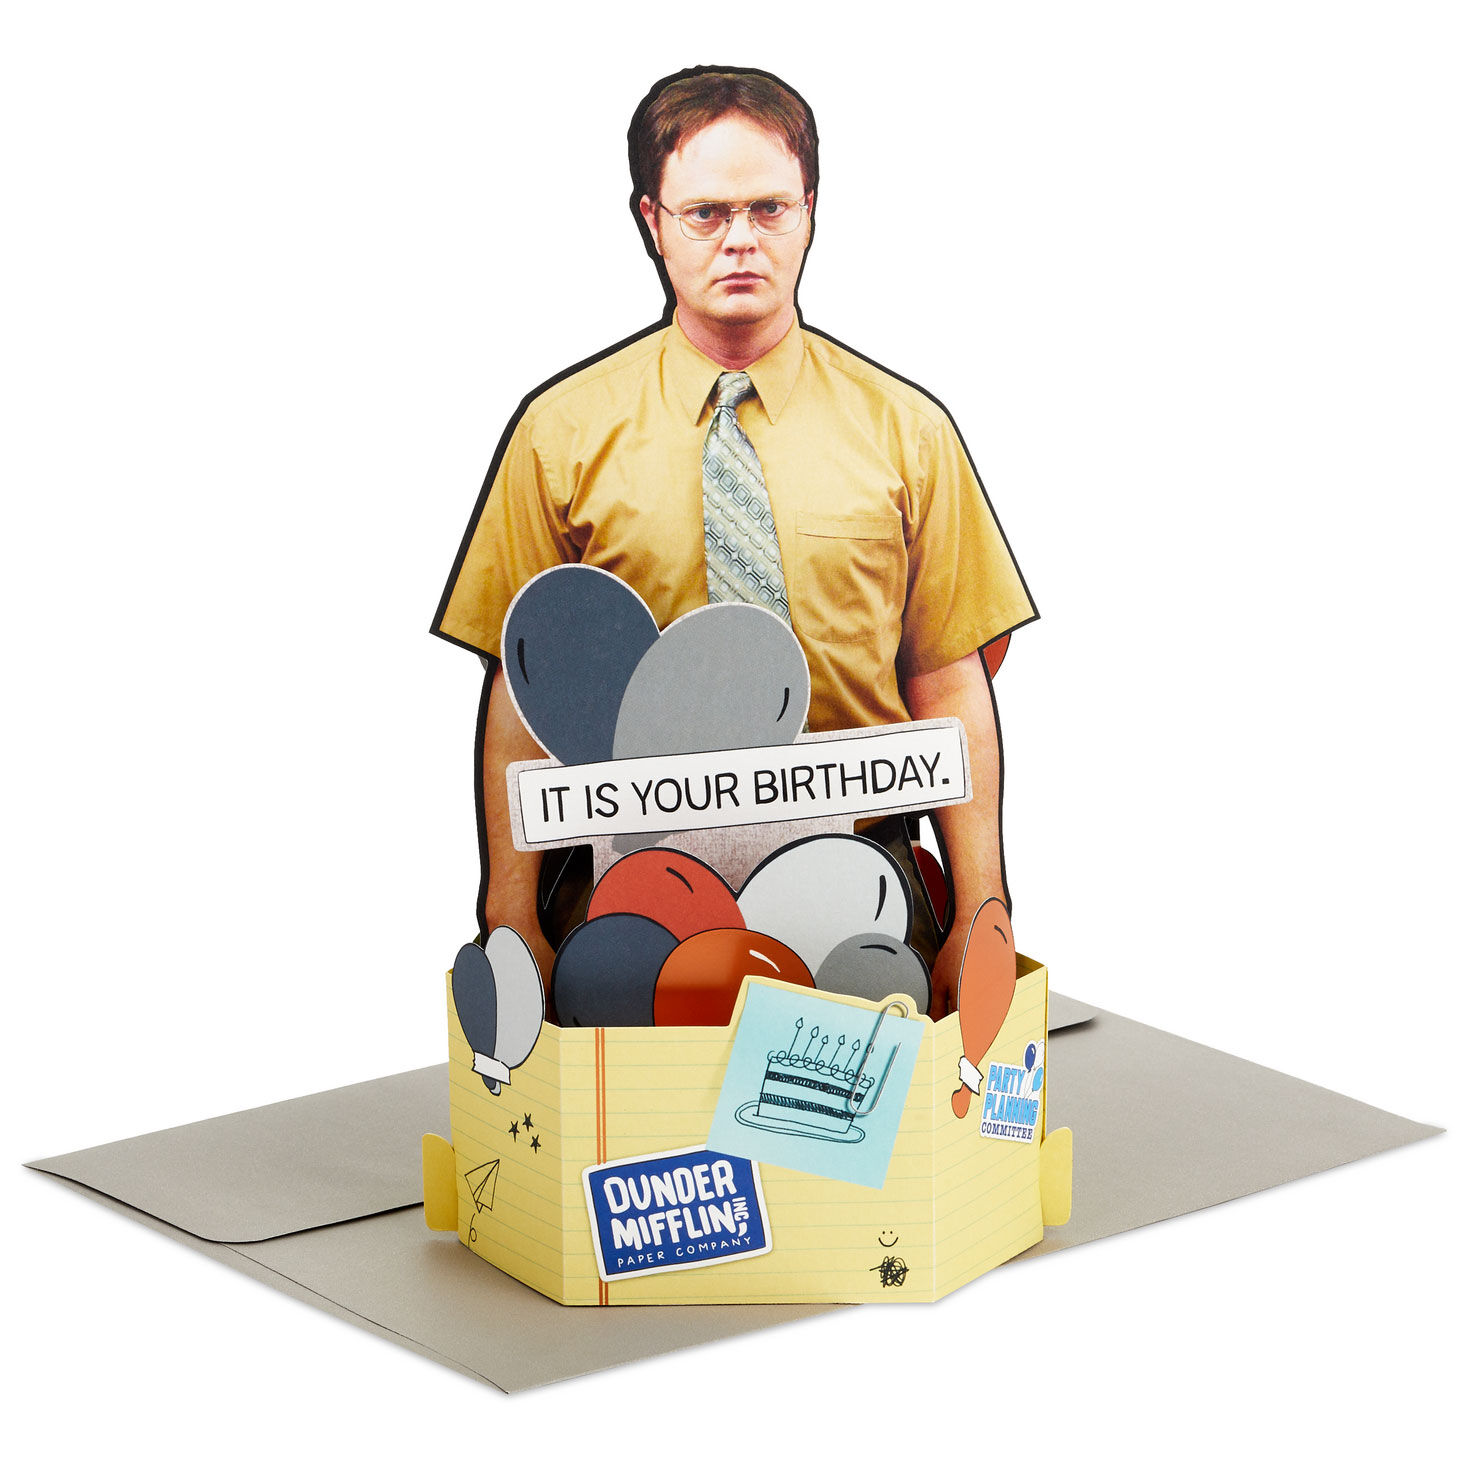 https://www.hallmark.com/dw/image/v2/AALB_PRD/on/demandware.static/-/Sites-hallmark-master/default/dwf94c4d0b/images/finished-goods/products/799WDR1213/The-Office-Dwight-Schrute-3D-PopUp-Birthday-Card_799WDR1213_01.jpg?sfrm=jpg